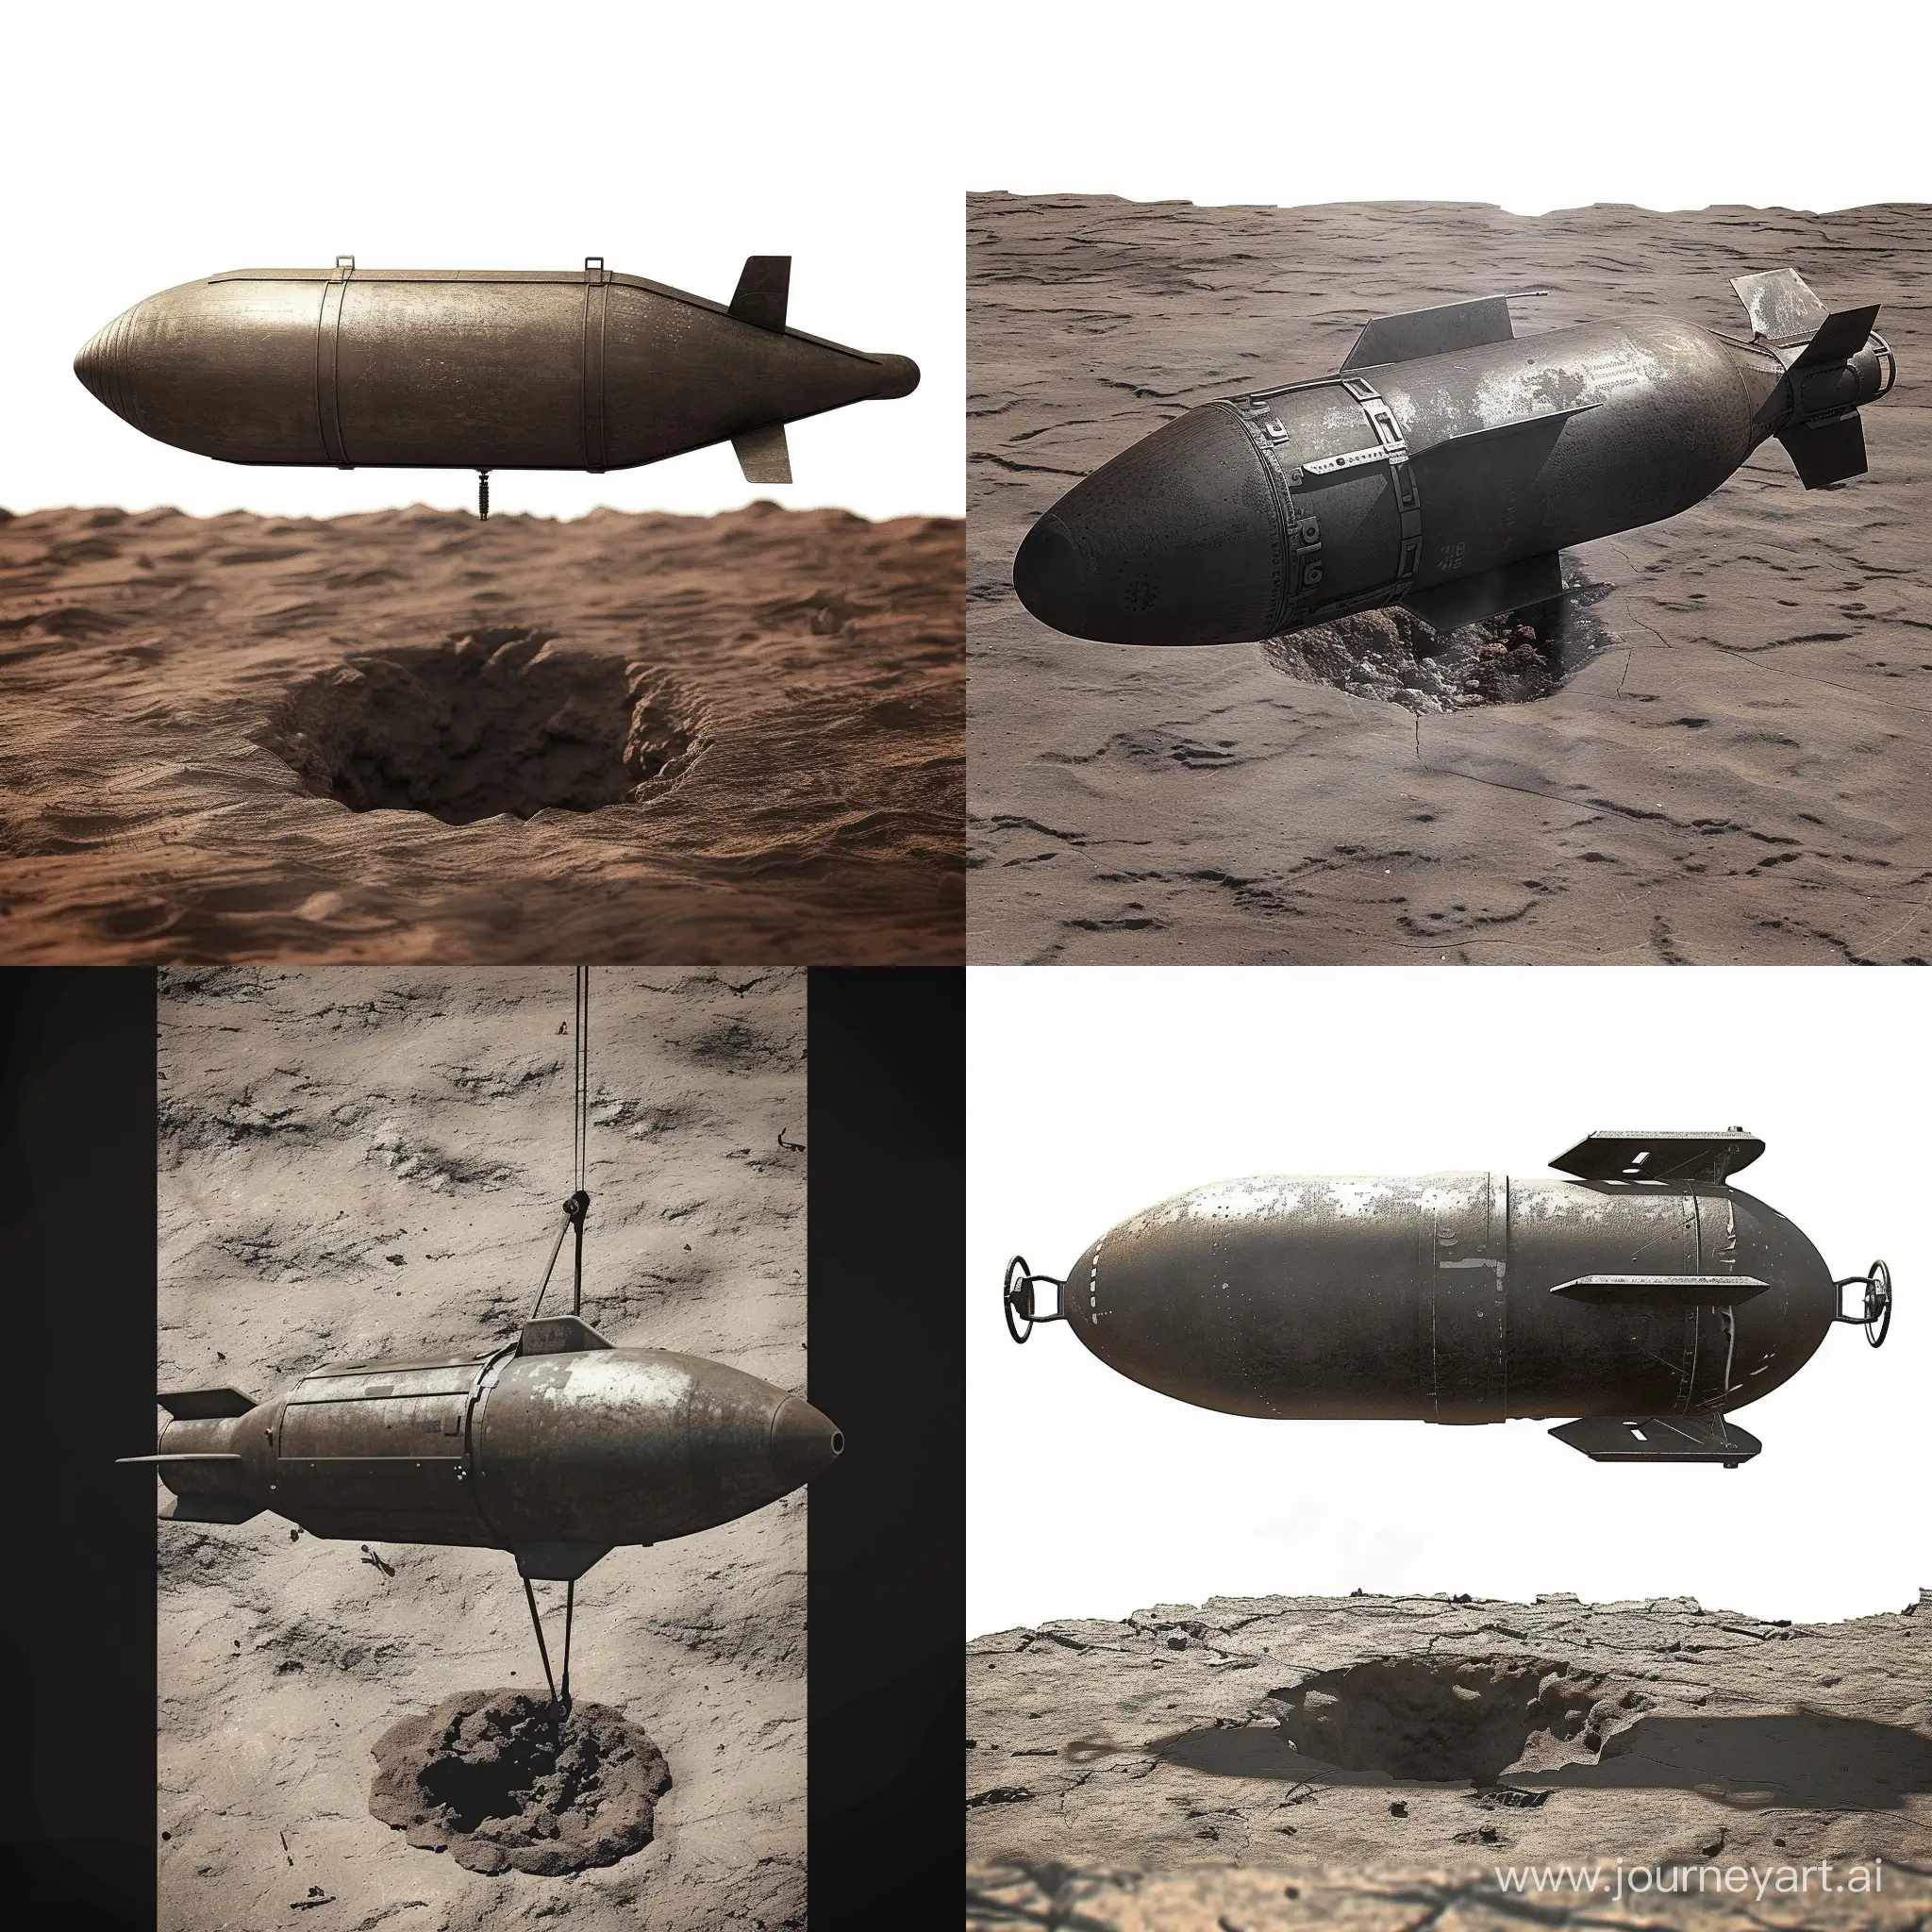 Unexploded-ANM56-Aerial-Bomb-Creates-Ground-Crater